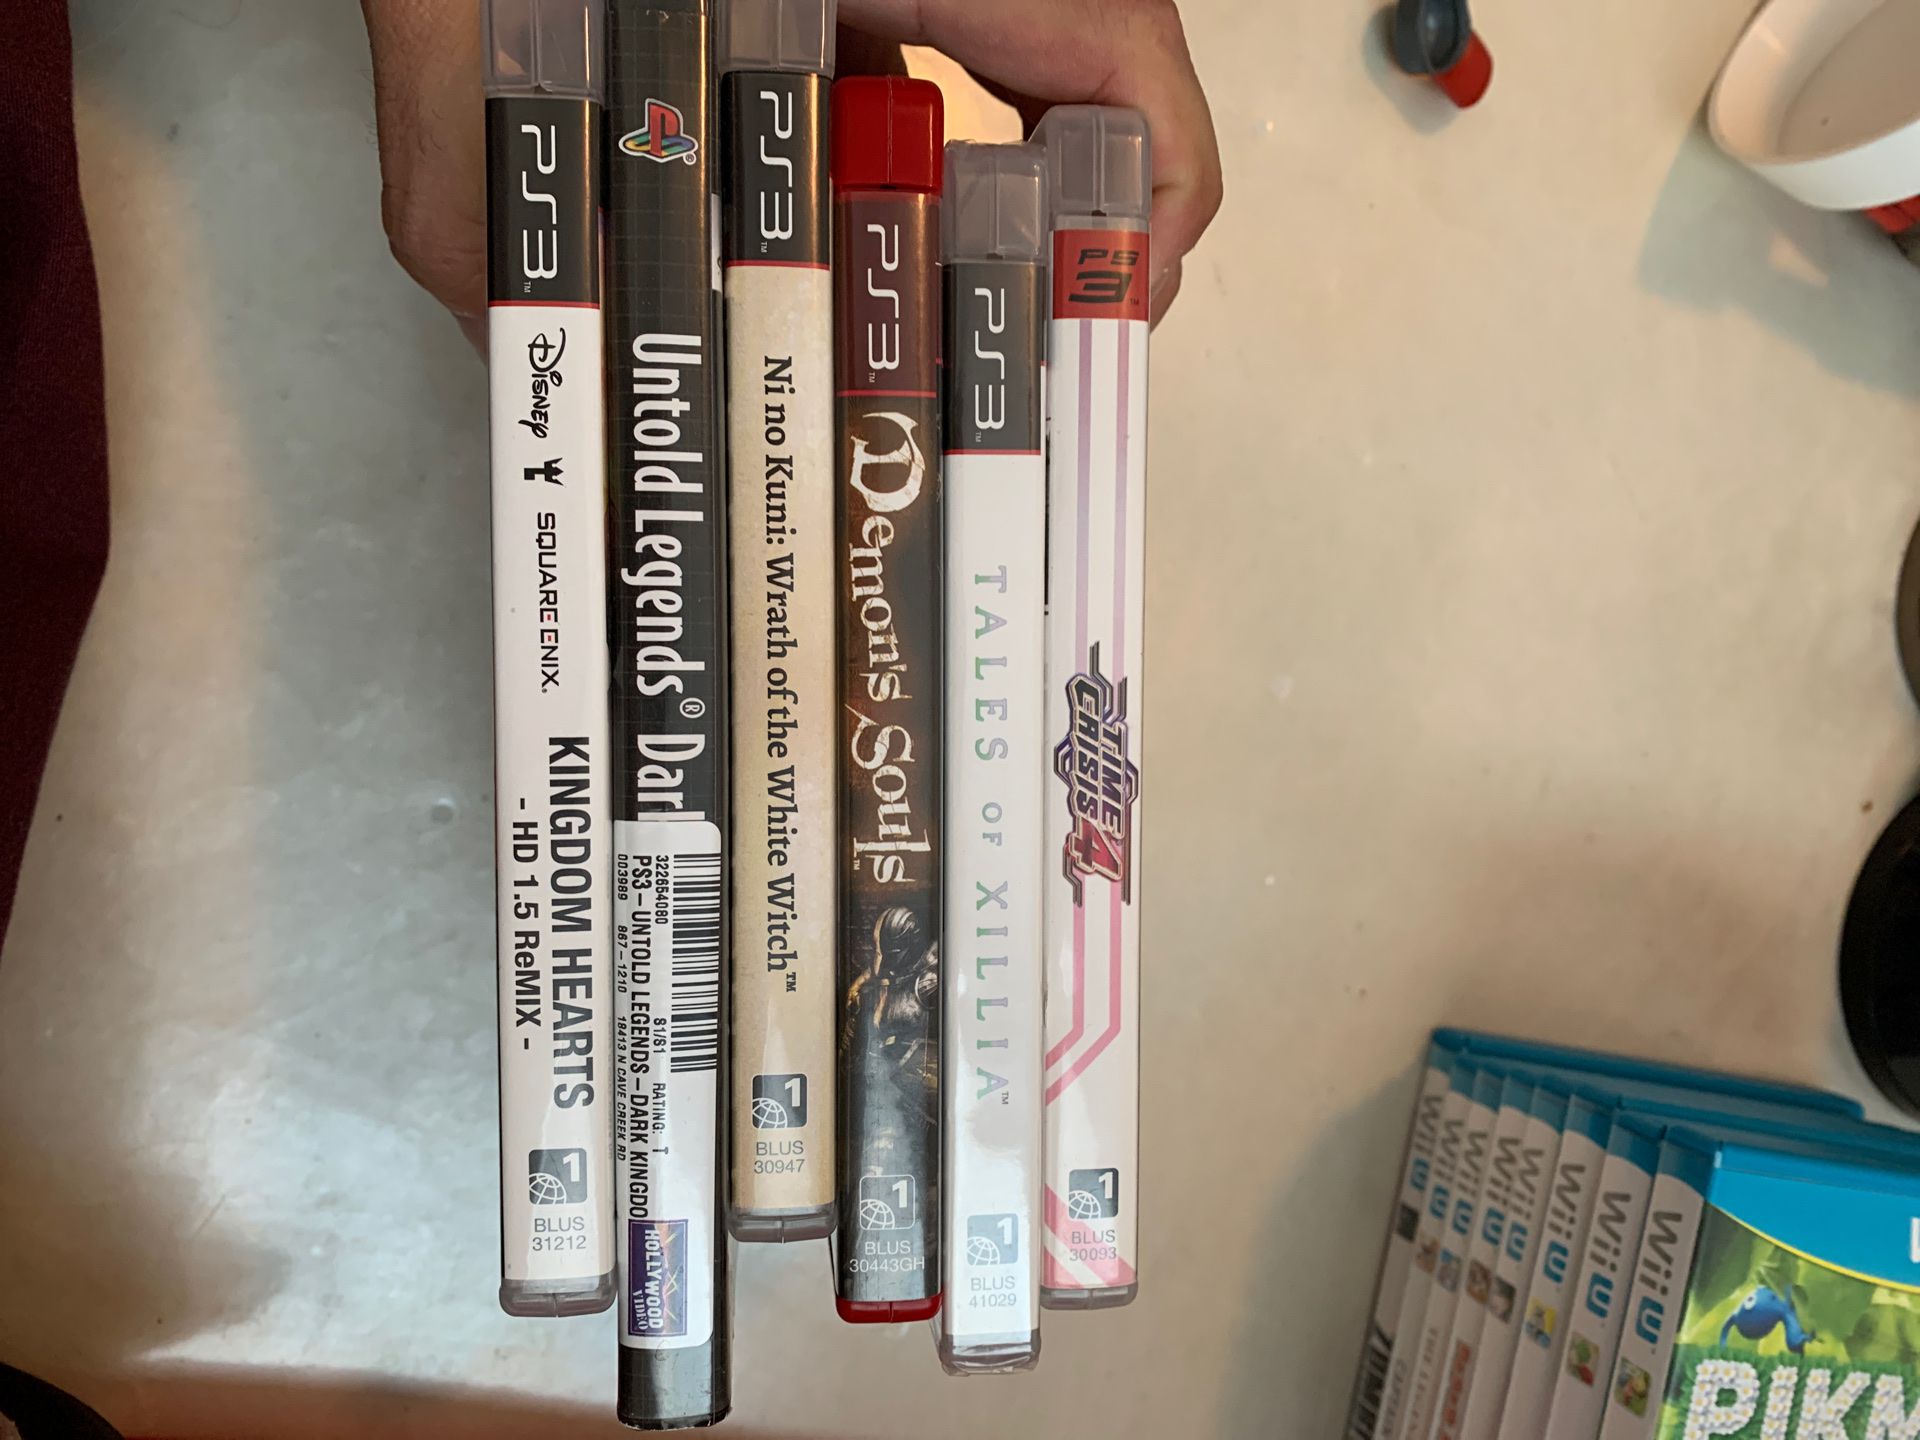 6 ps3 games just need them gone